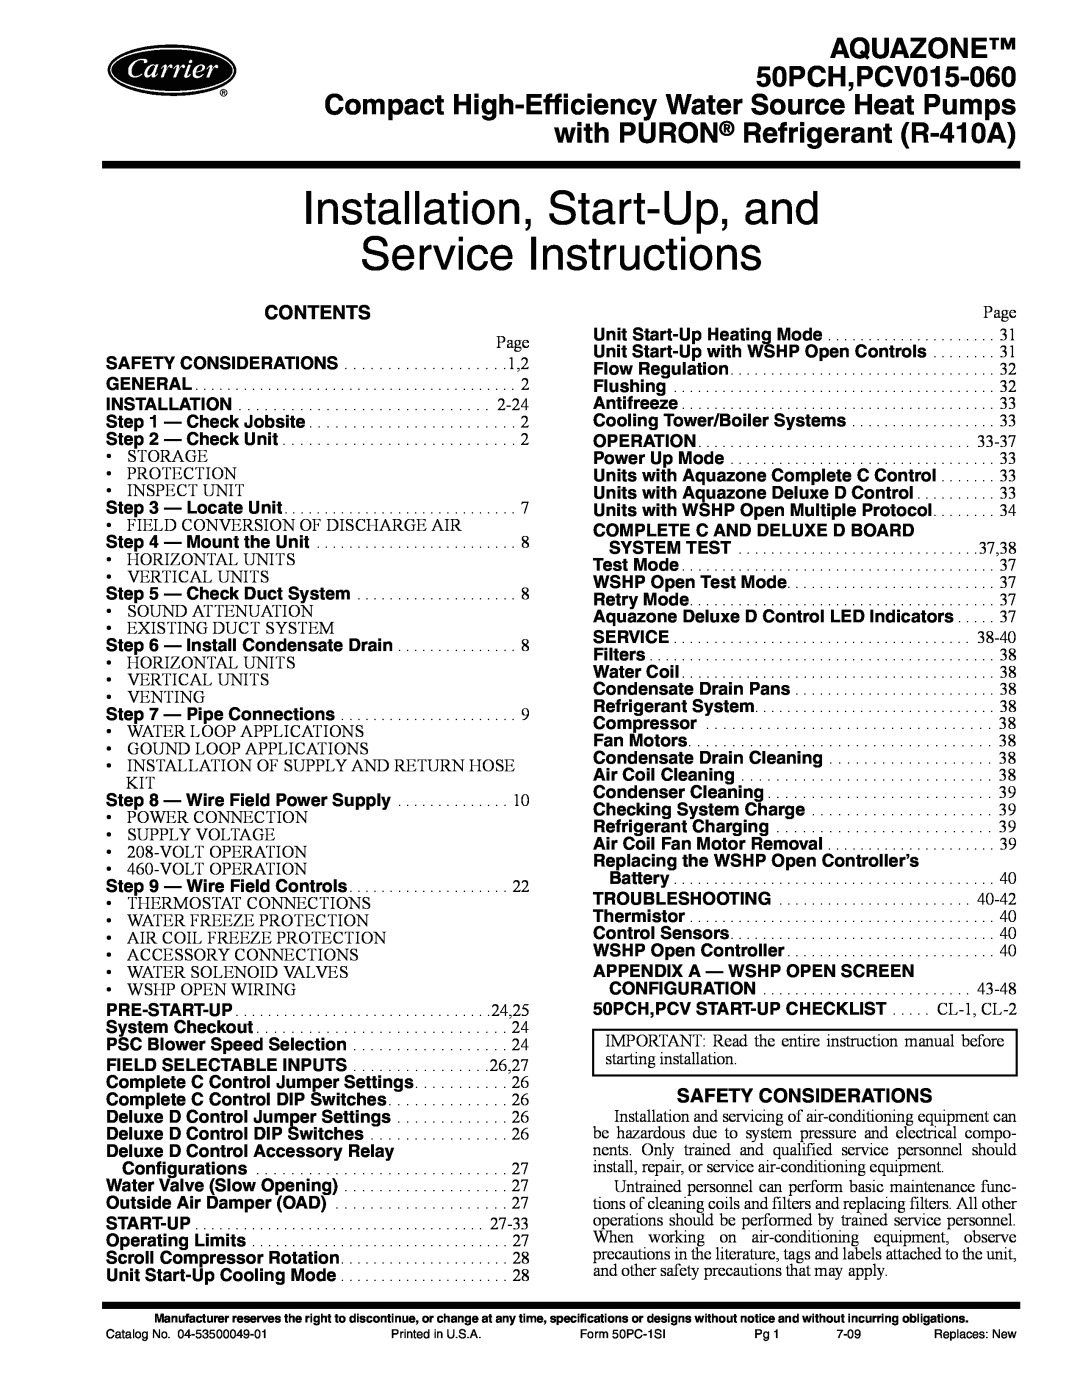 Carrier PCV015-060 specifications Contents, Safety Considerations, Installation, Start-Up,and Service Instructions 